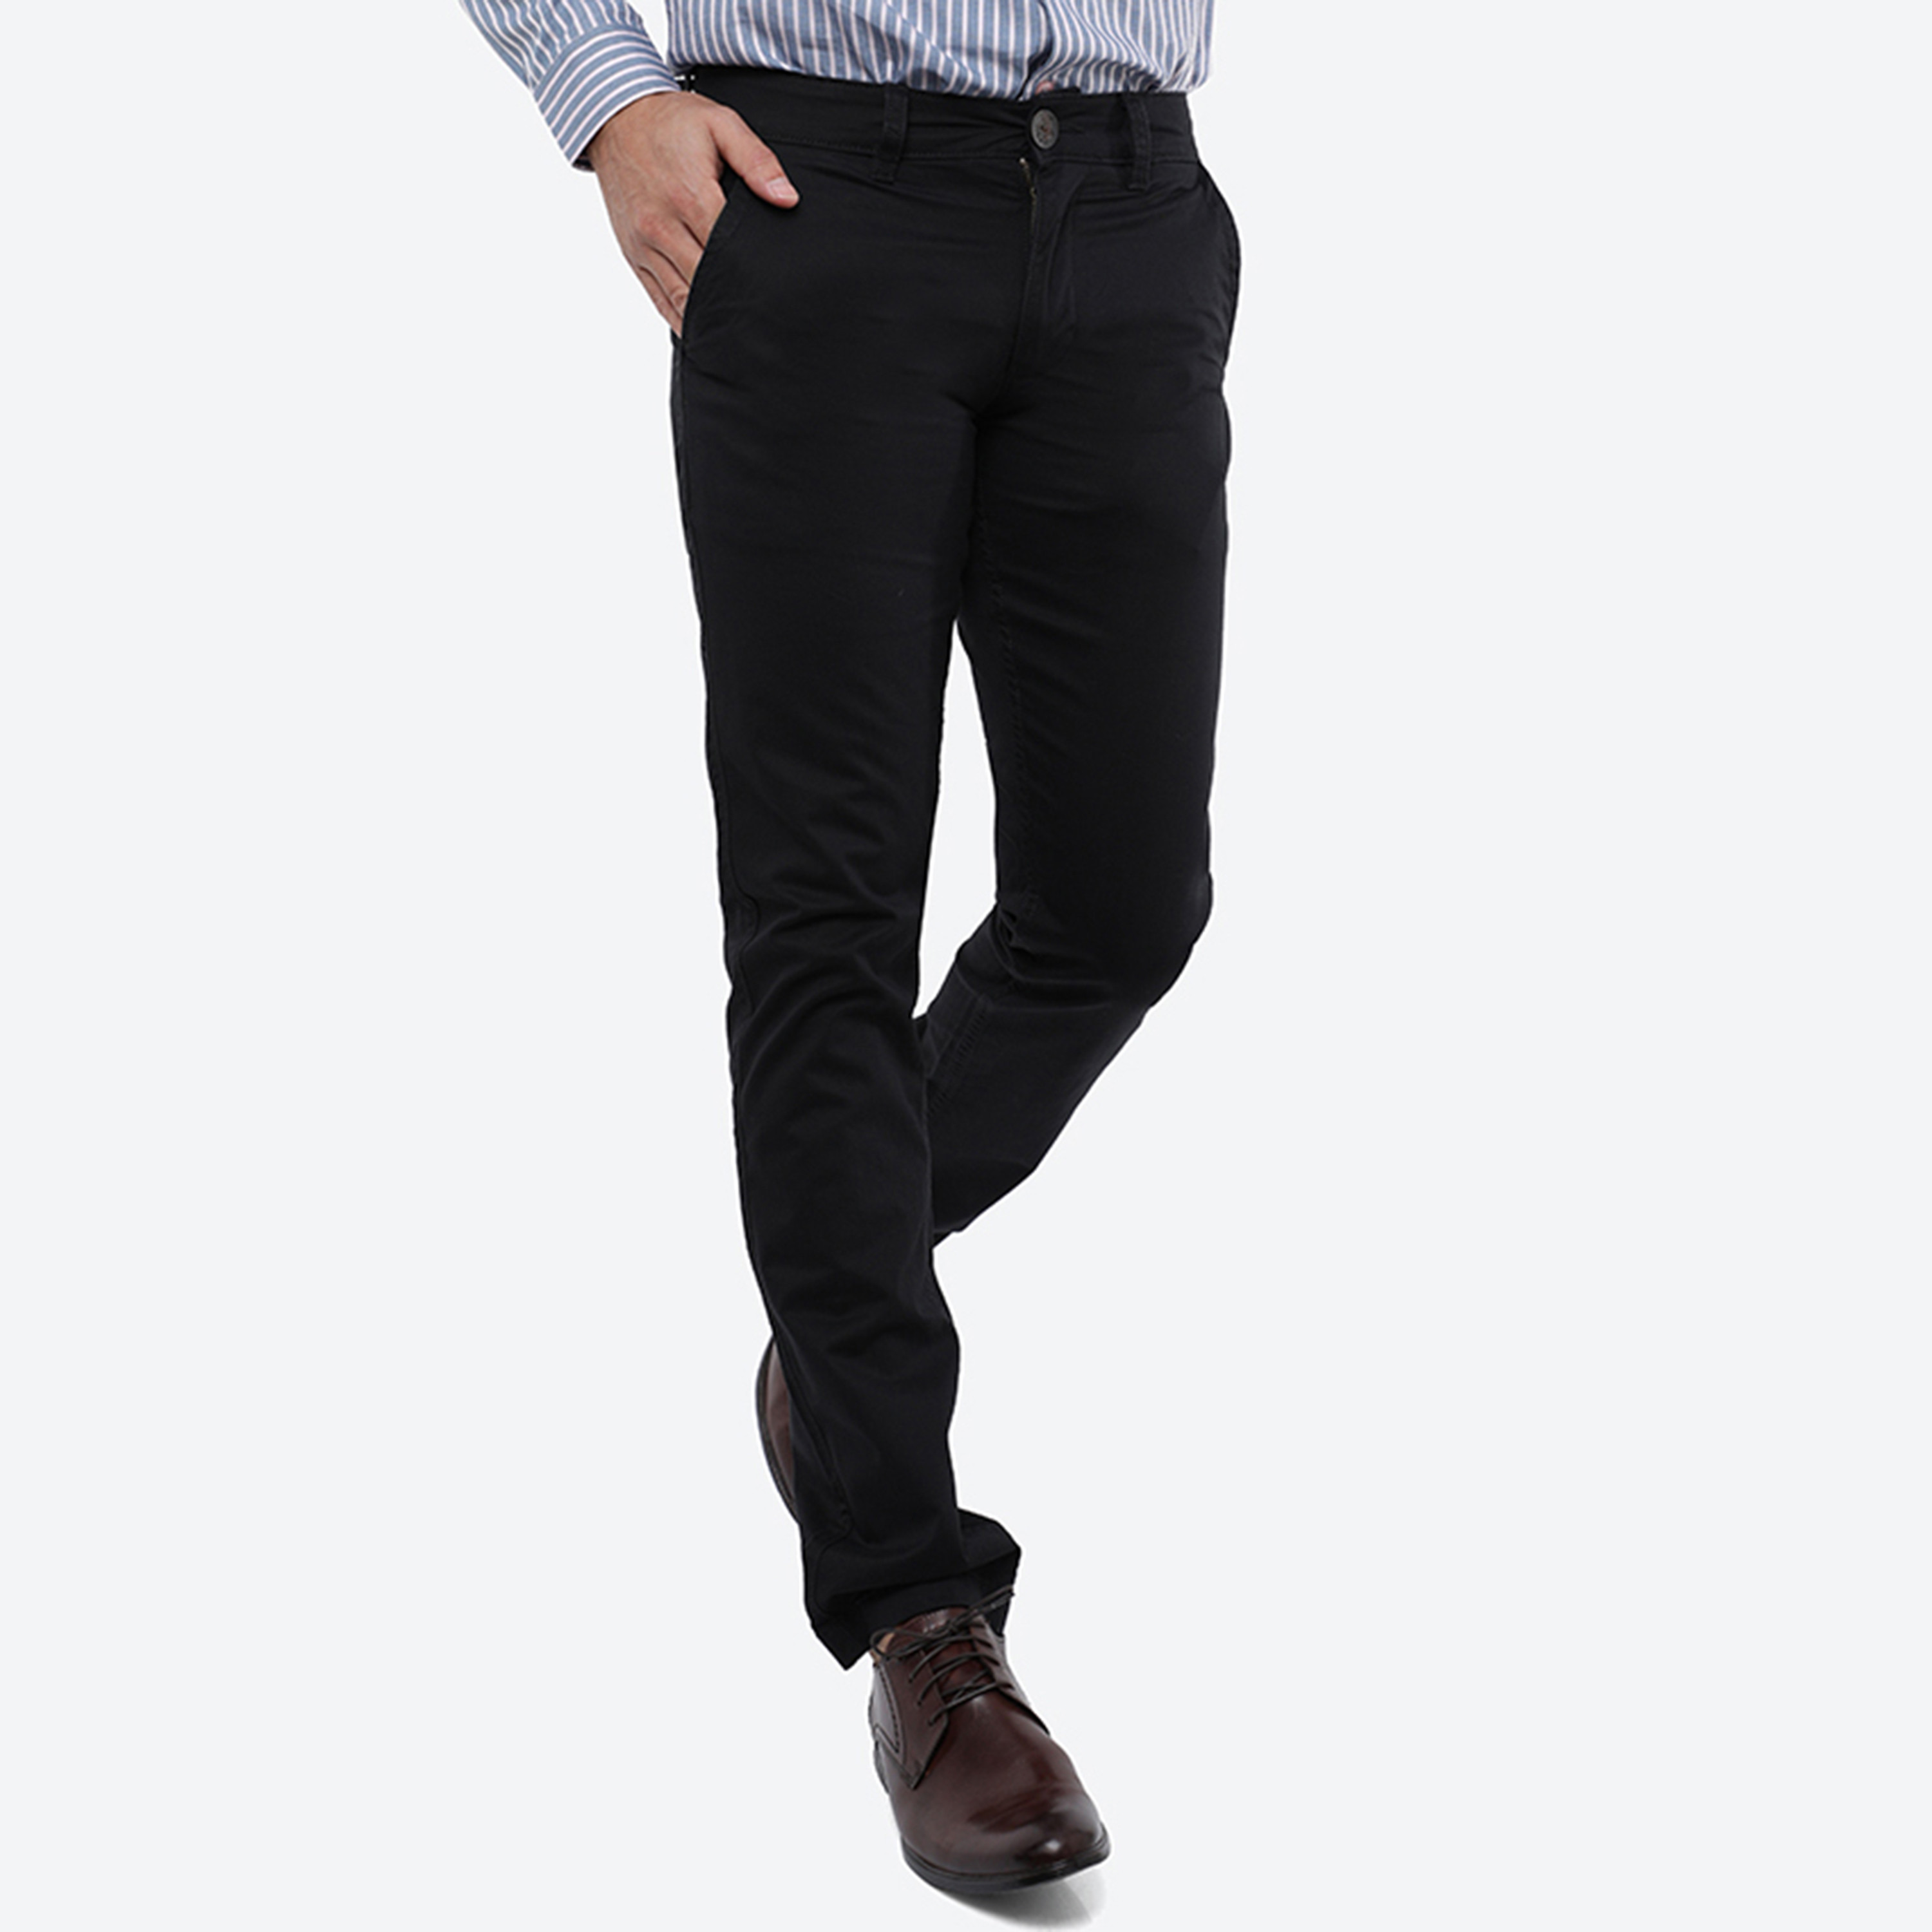 Buy Black Trousers & Pants for Men by INDEPENDENCE Online | Ajio.com